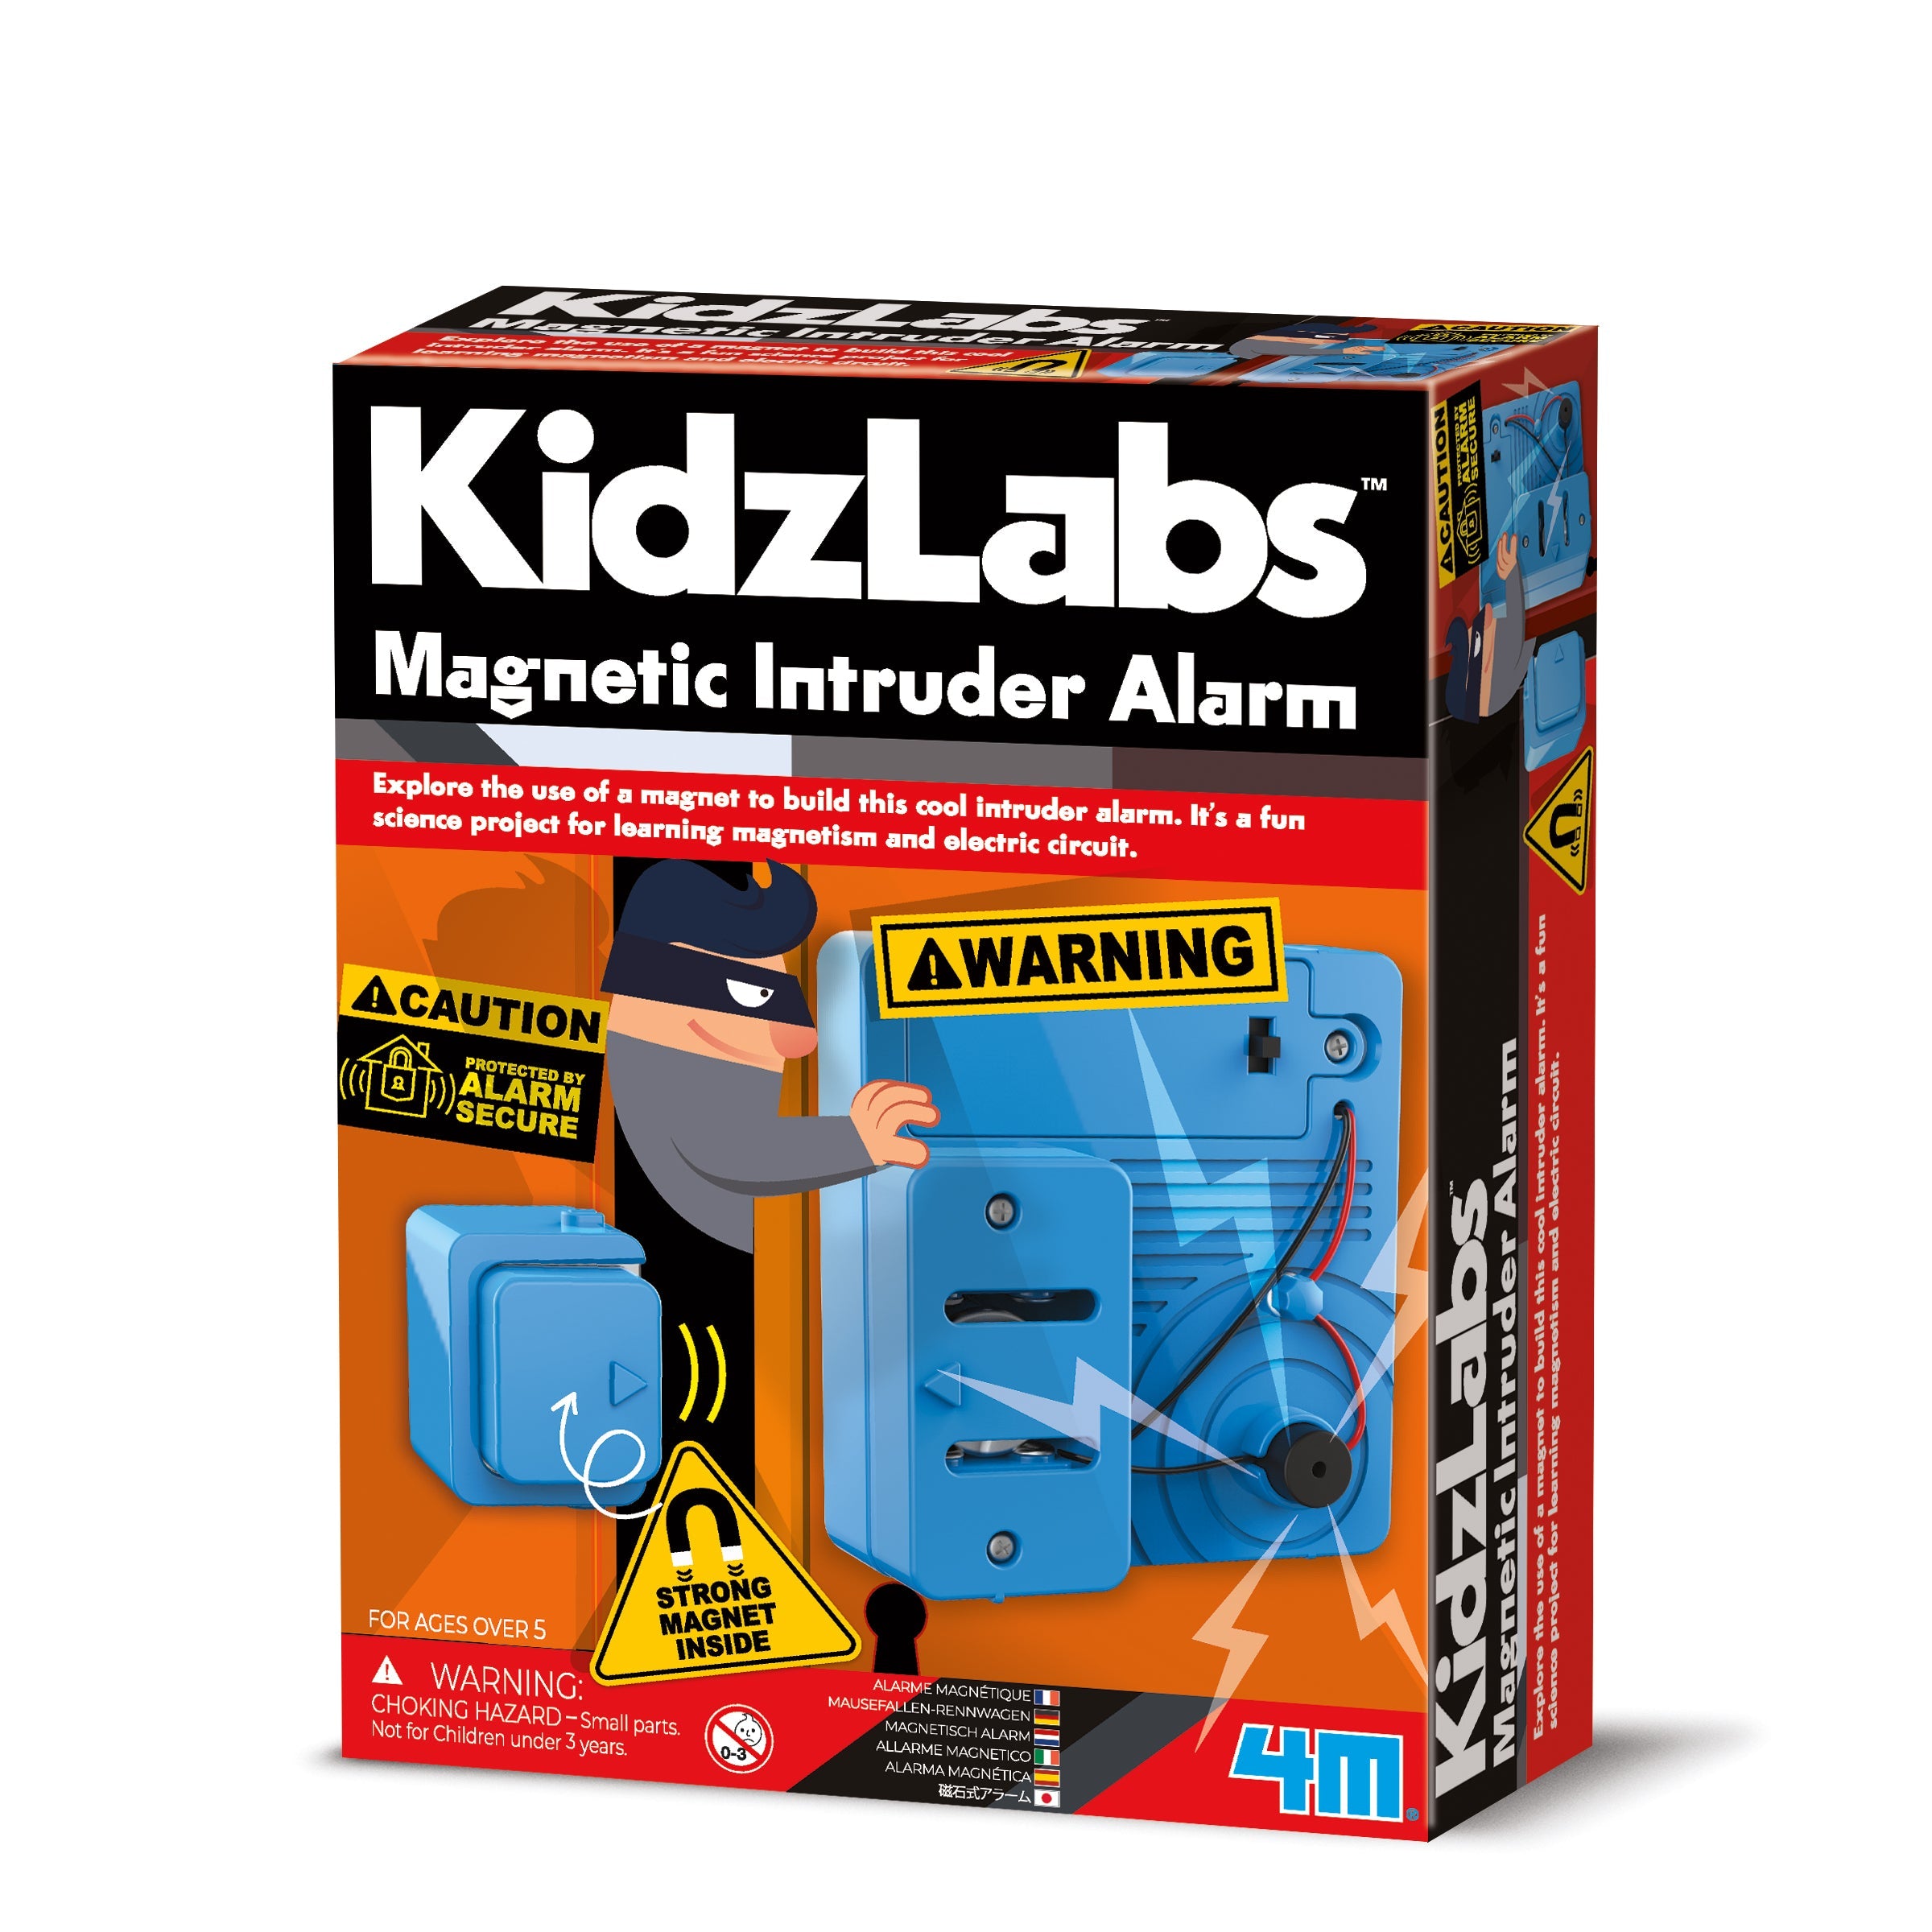 KidzLabs Magnetic Intruder Alarm by 4M from Great Gizmos – Great